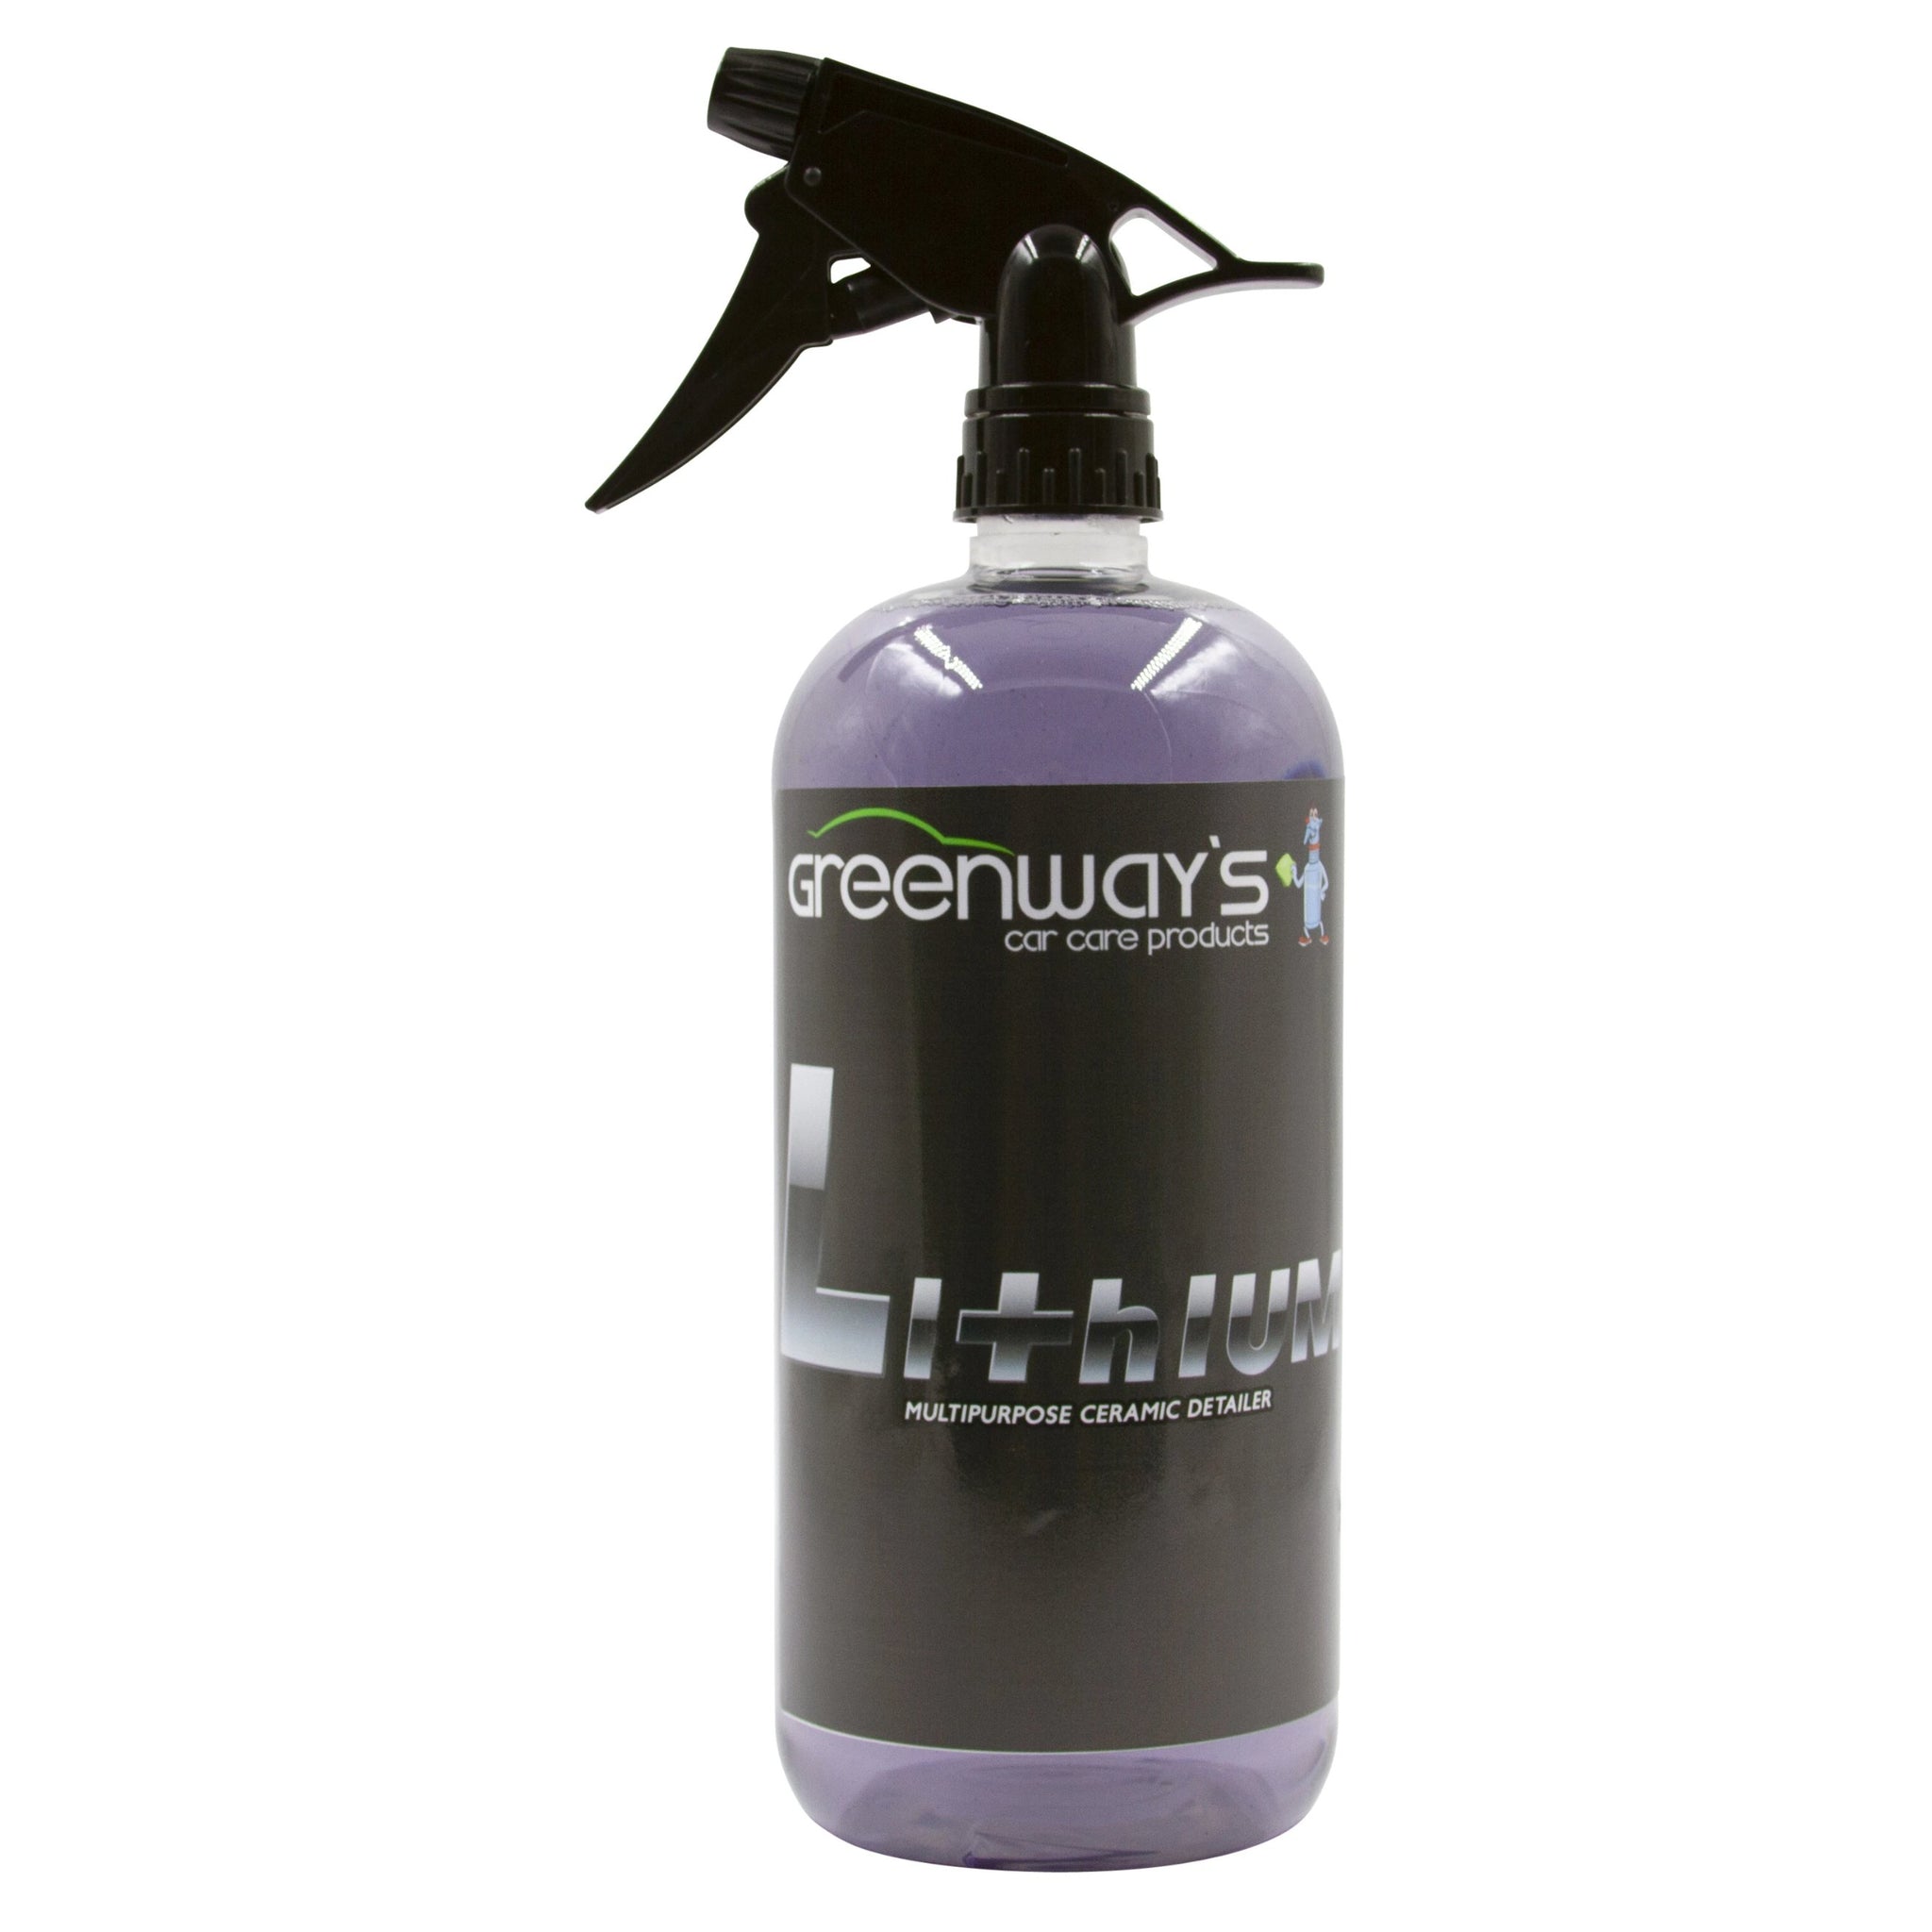 Greenway’s Lithium, graphene ceramic coating car sealant spray, extends current coating for enhanced protection, 32 ounces.